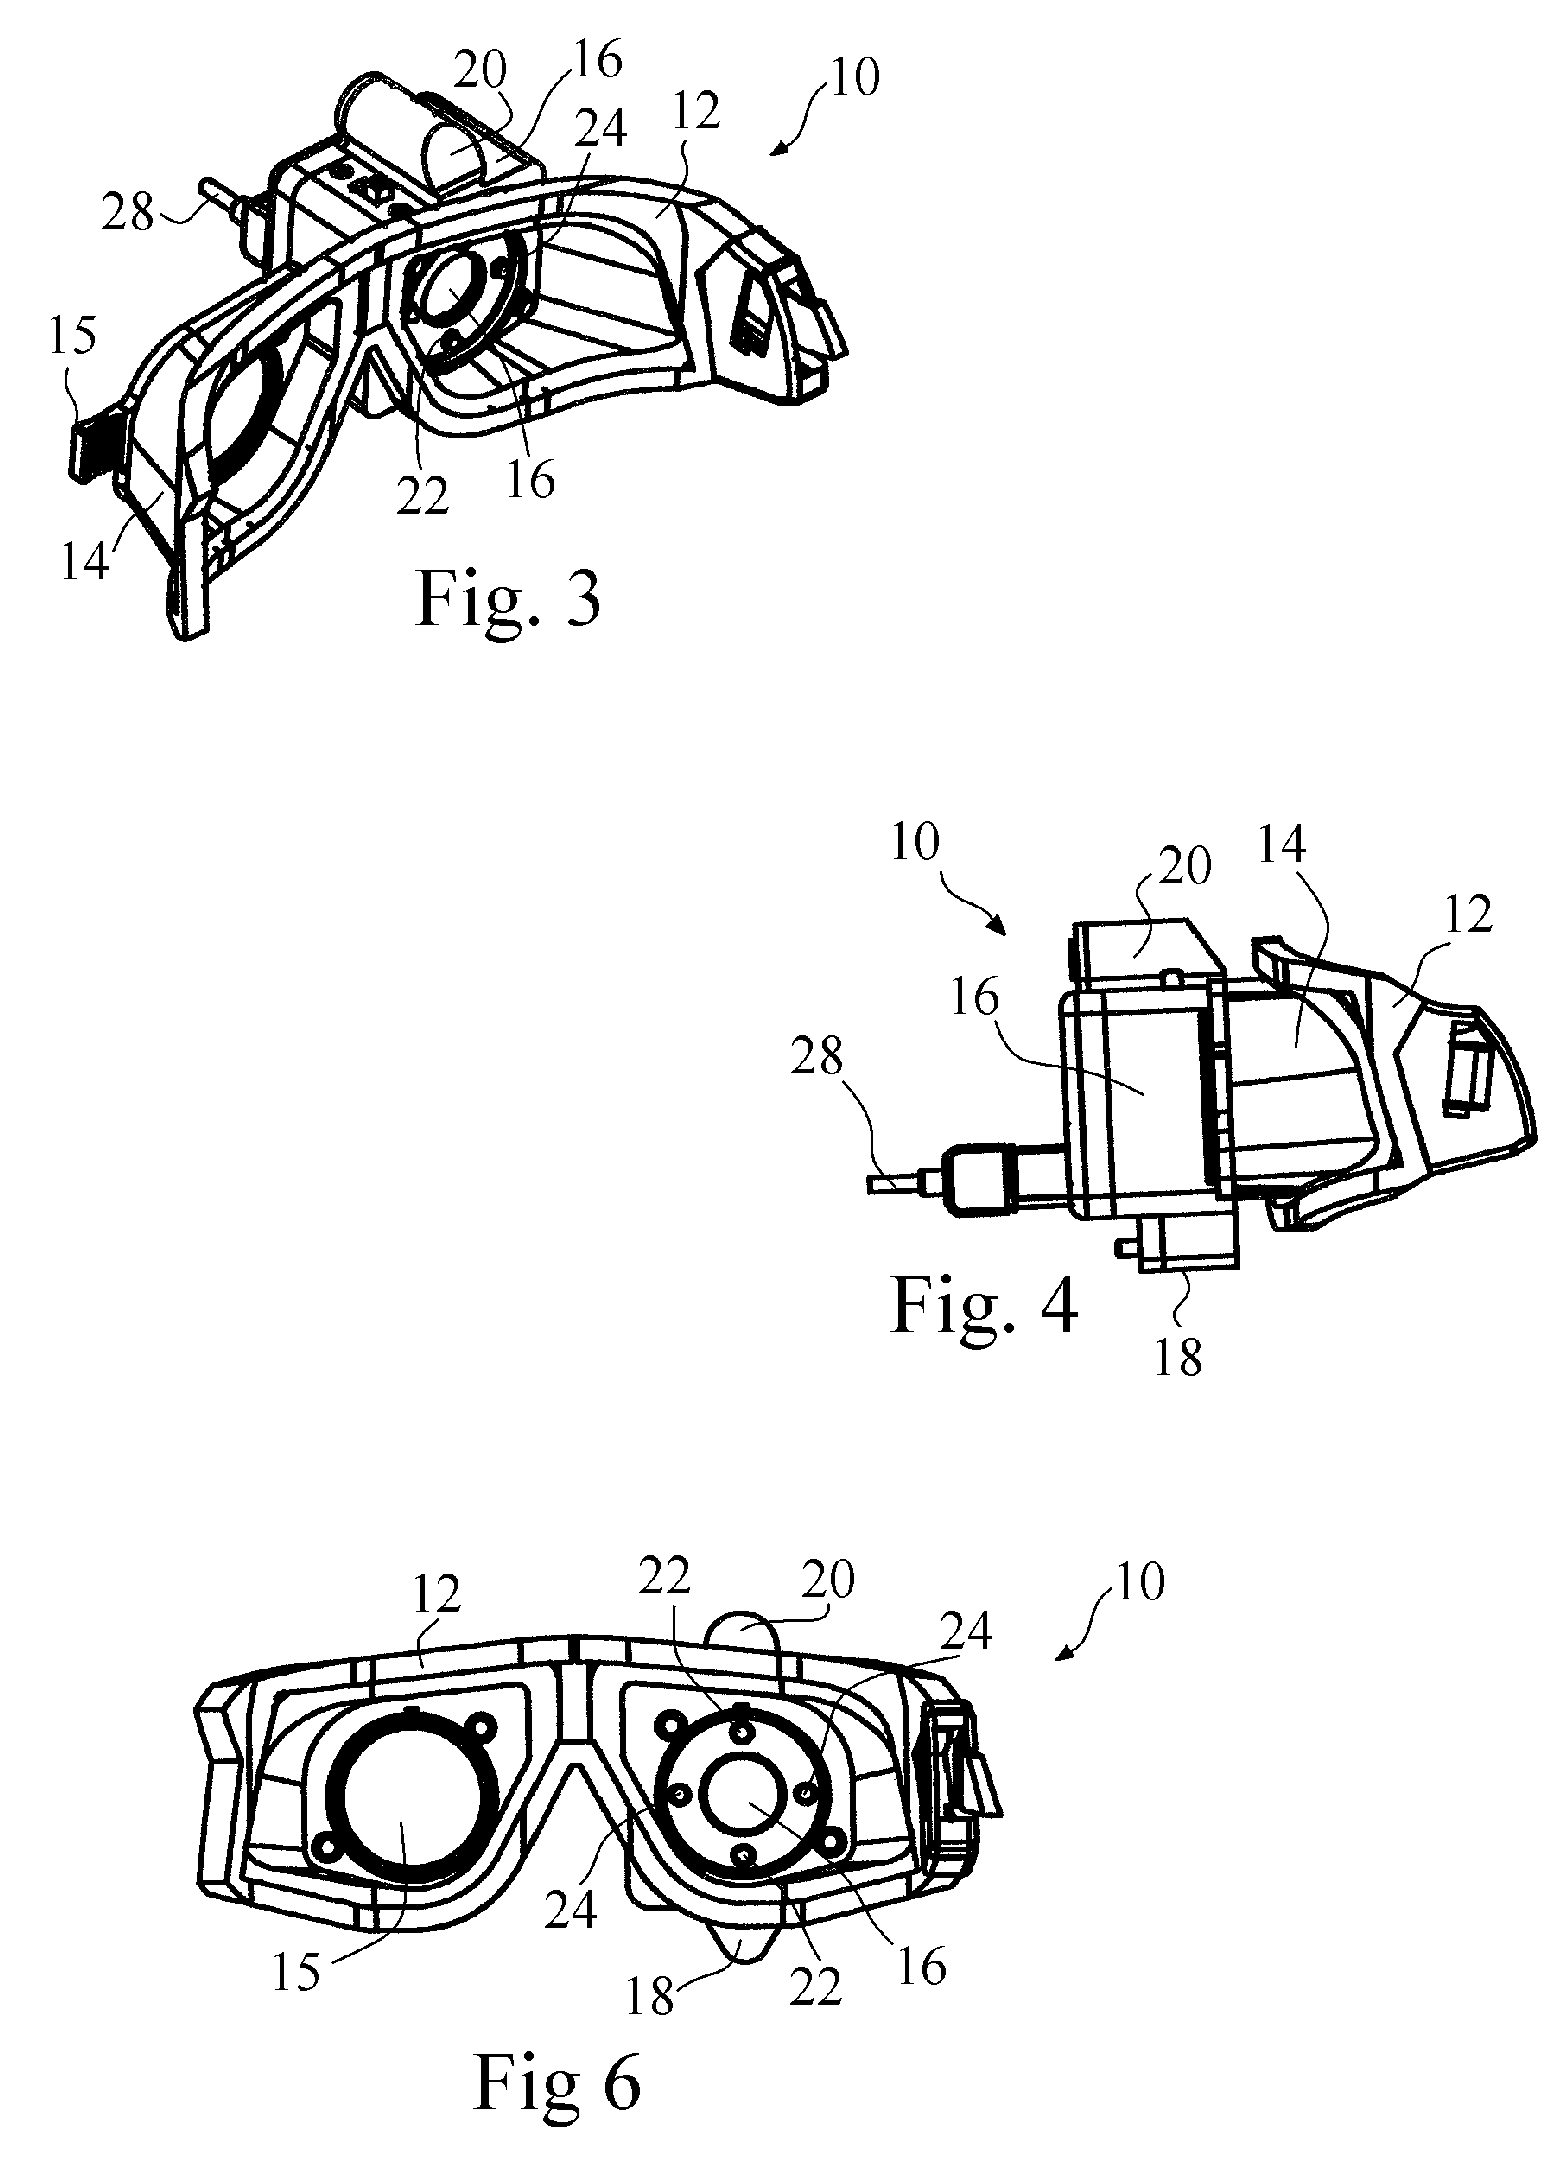 Portable video oculography system with integral light stimulus system